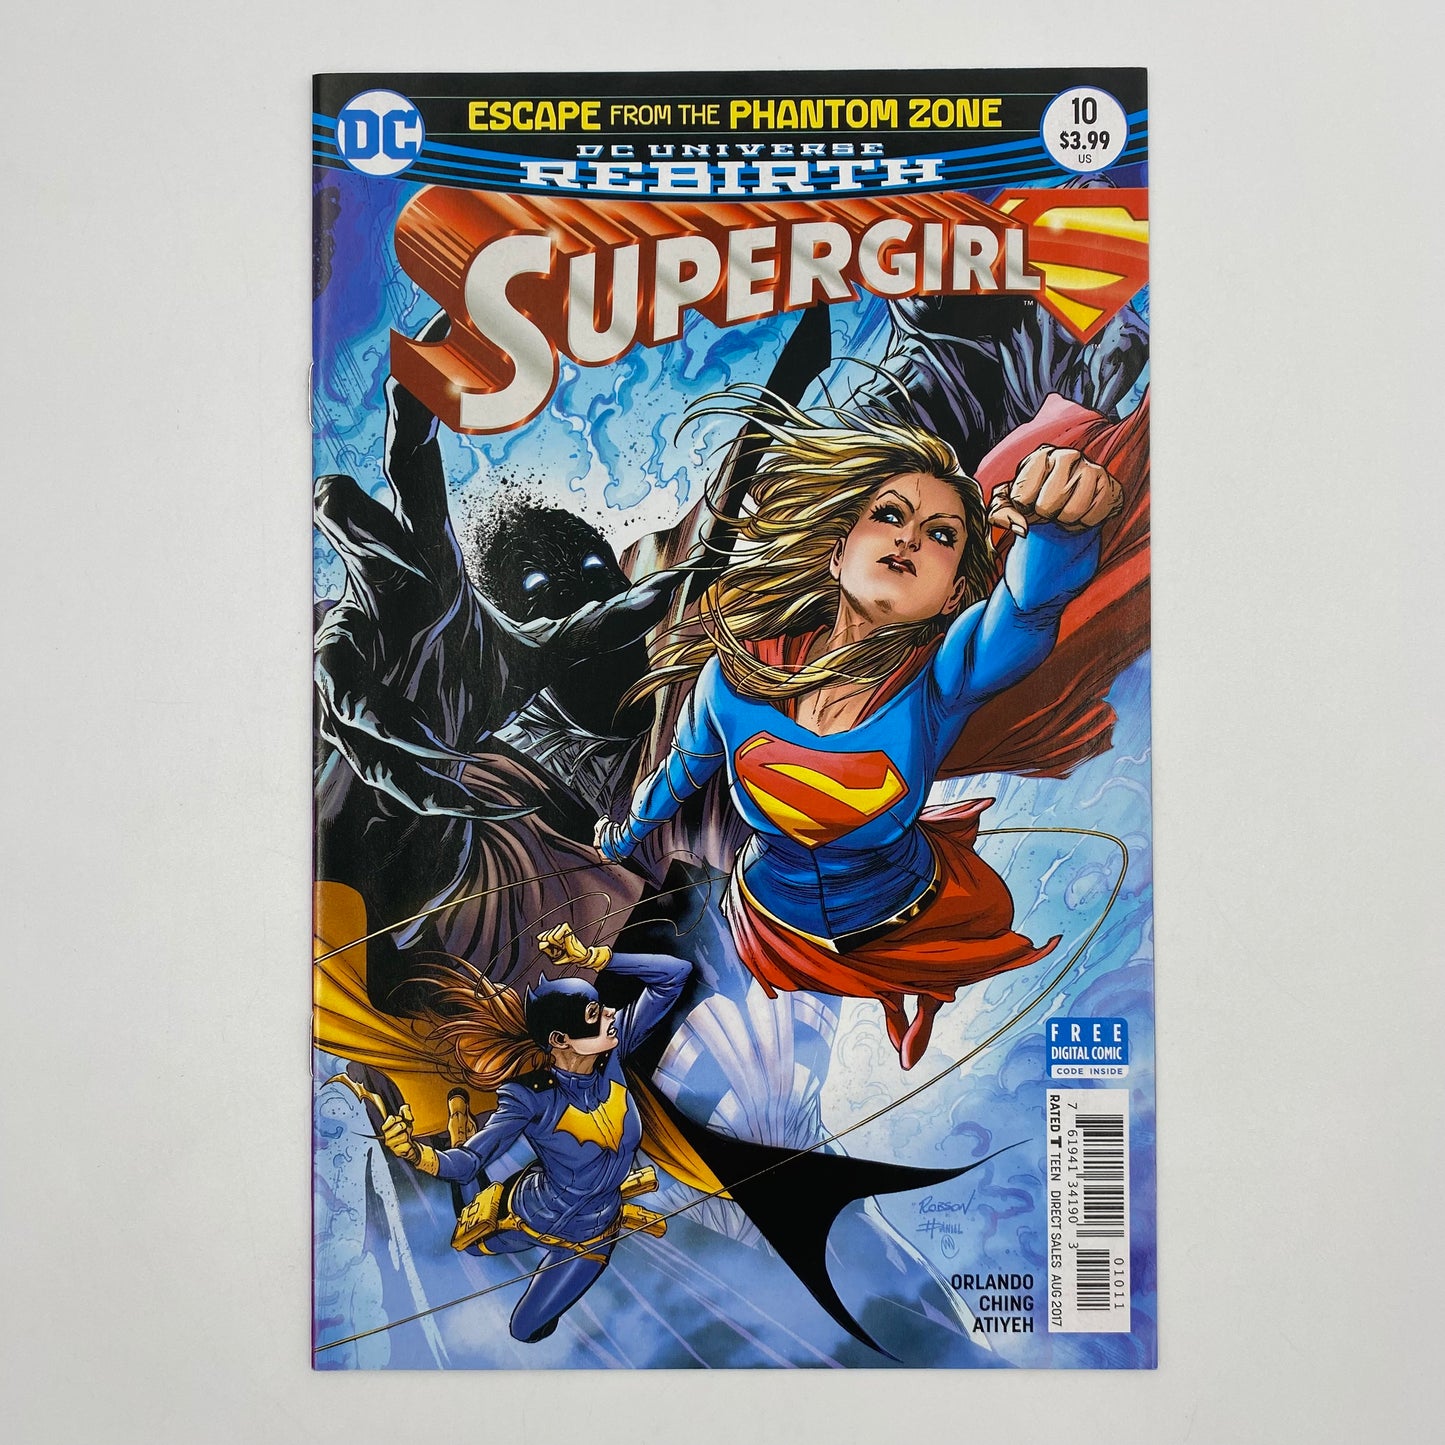 Supergirl #9-11 “Escape from the Phantom Zone” (2017) DC